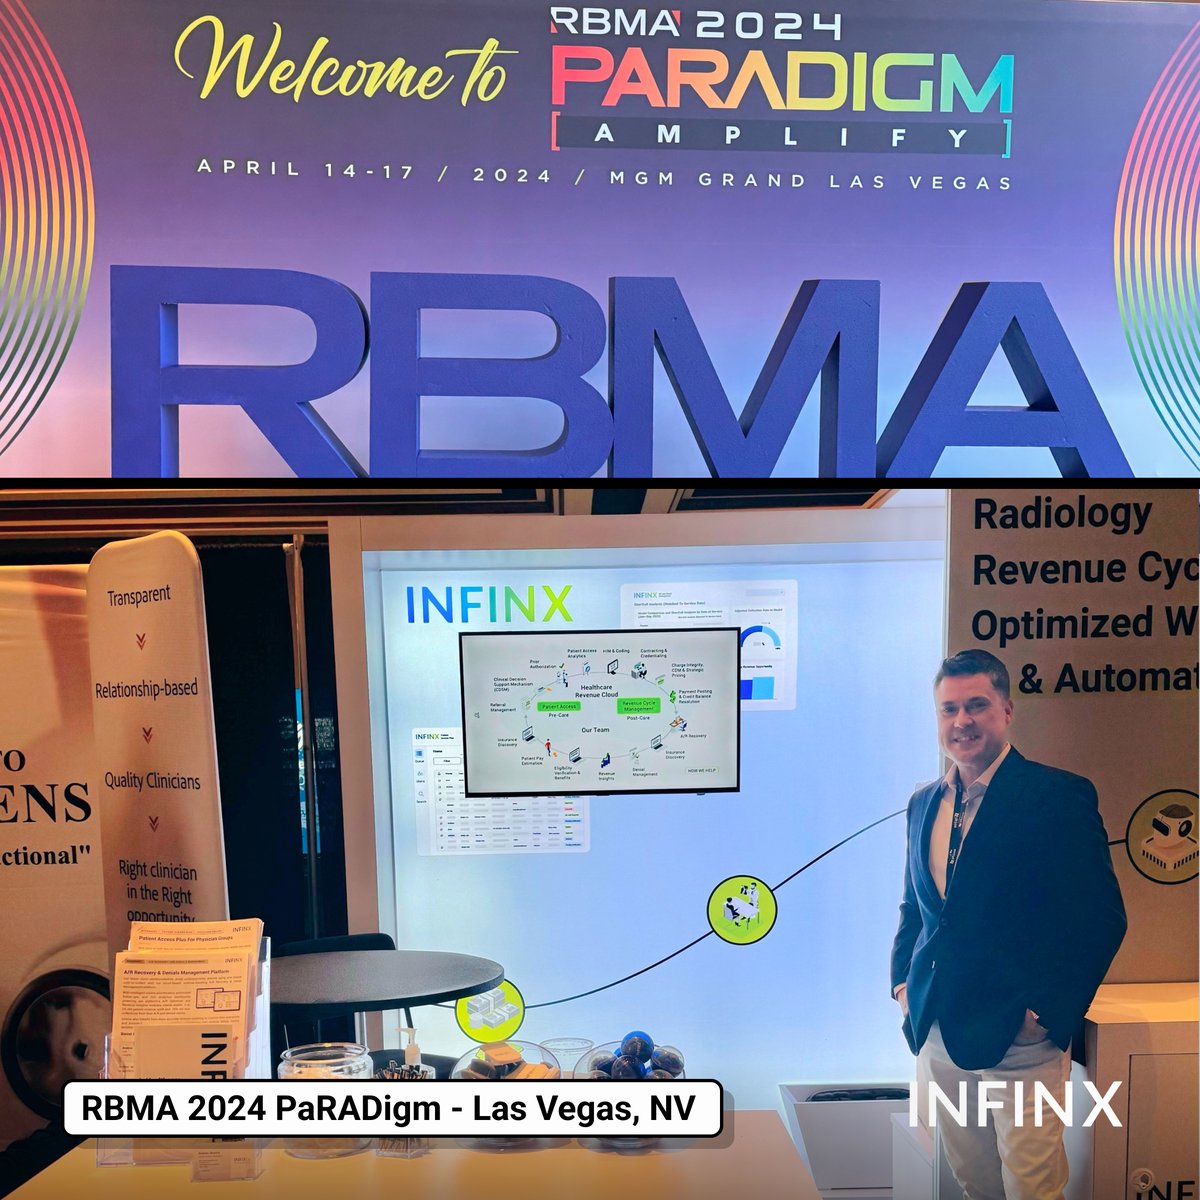 At RBMA PaRADigm? Connect at booth #426 and learn how our proven AI helps radiology practices streamline patient access, reduce denials, and capture more revenue. hubs.li/Q02sWRc40 #RBMA #RBMAPaRADigm24 #RCM #RCMAutomation #Radiology #PriorAuthorization #PatientAccess